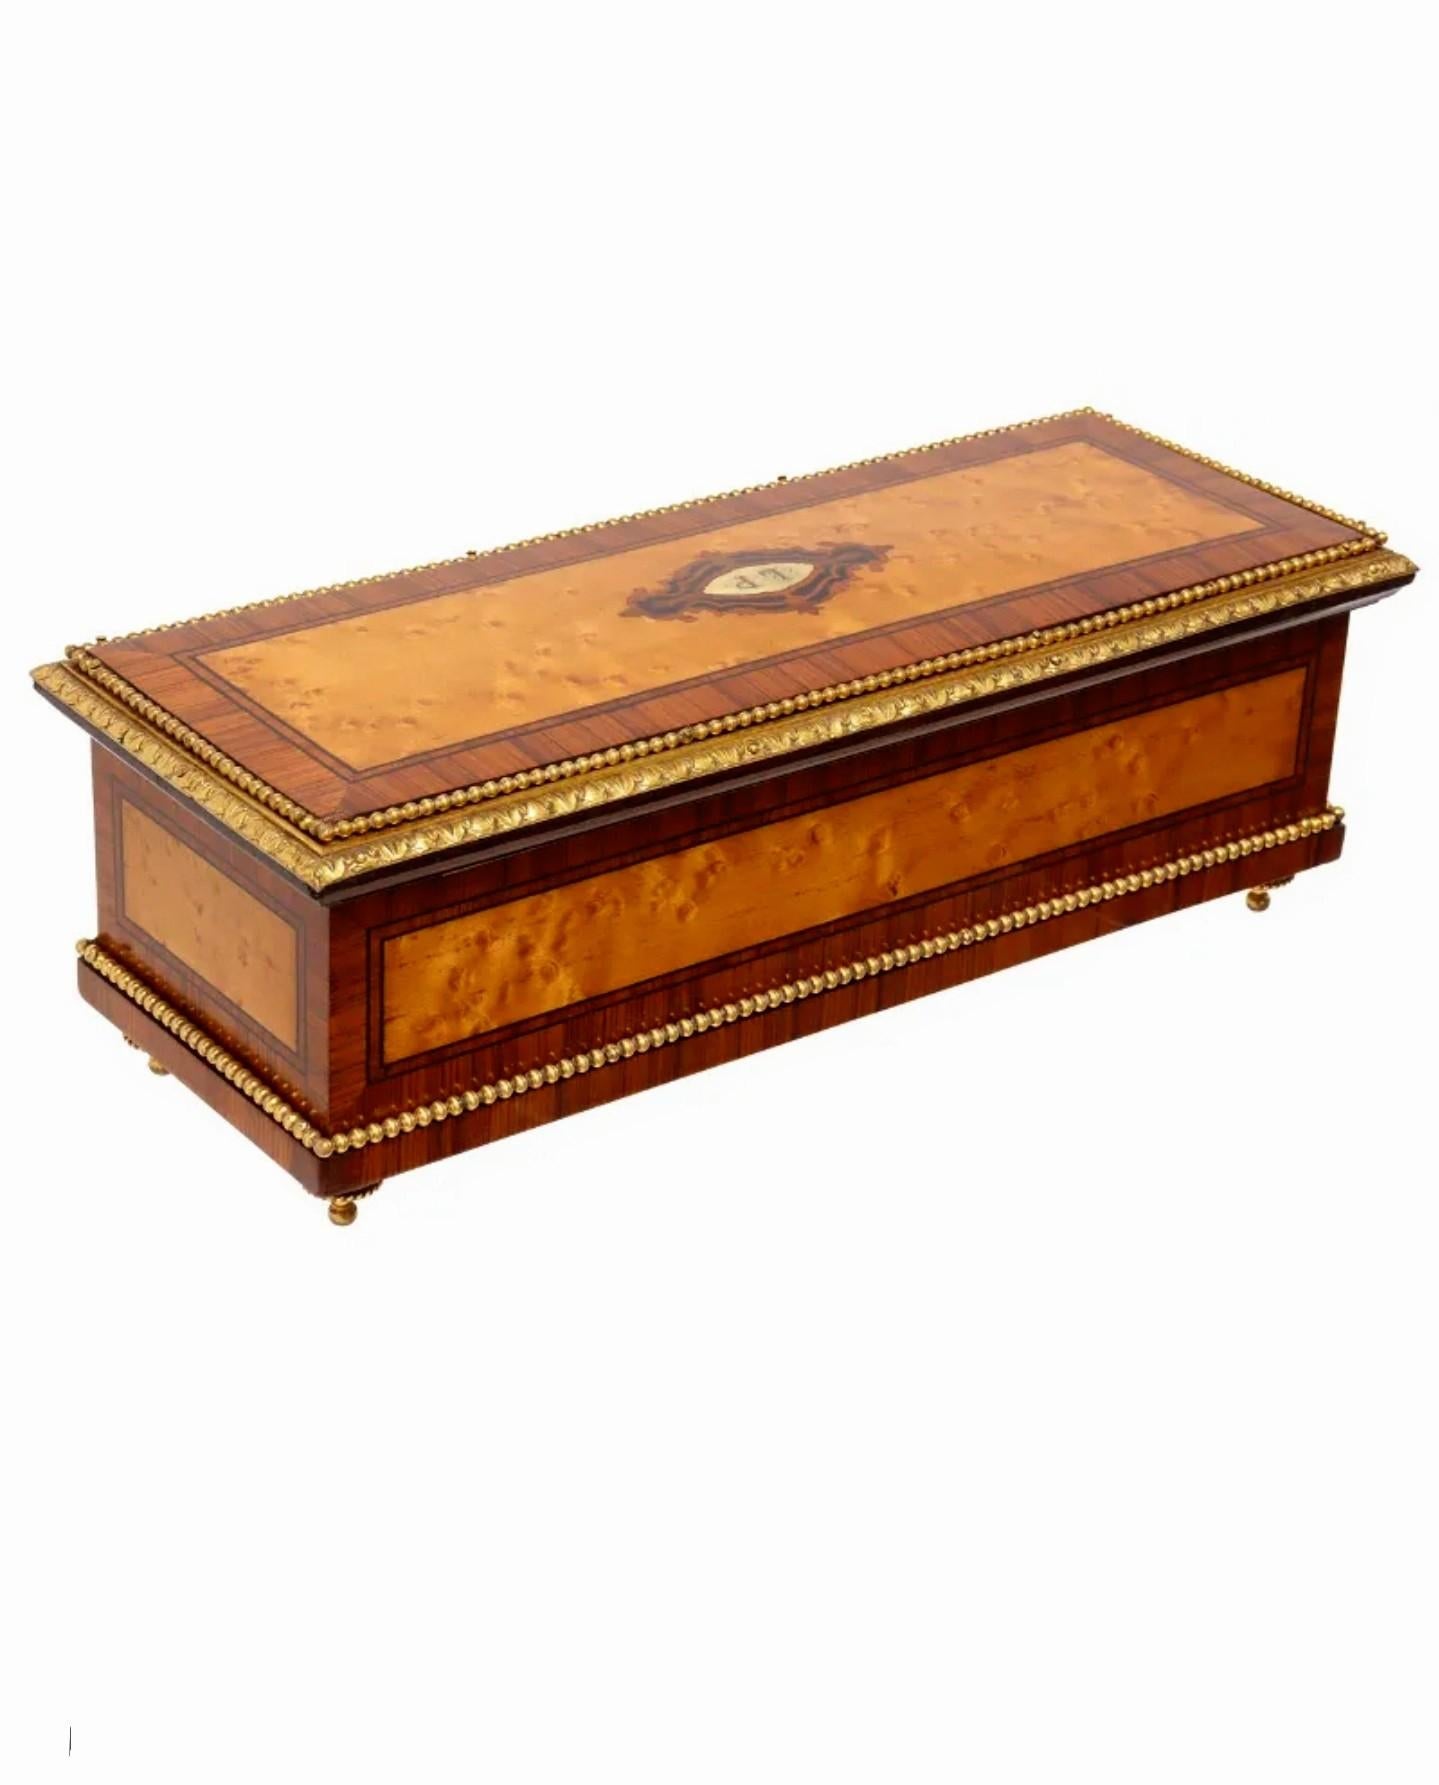 A scarce very fine quality Napoleon III Period (1852-1870) gilt bronze ormolu mounted inlaid glove box by important Parisian ébéniste Paul Sormani (1817-1877)

Exquisitely hand-crafted in France in the third quarter of the 19th century, featuring